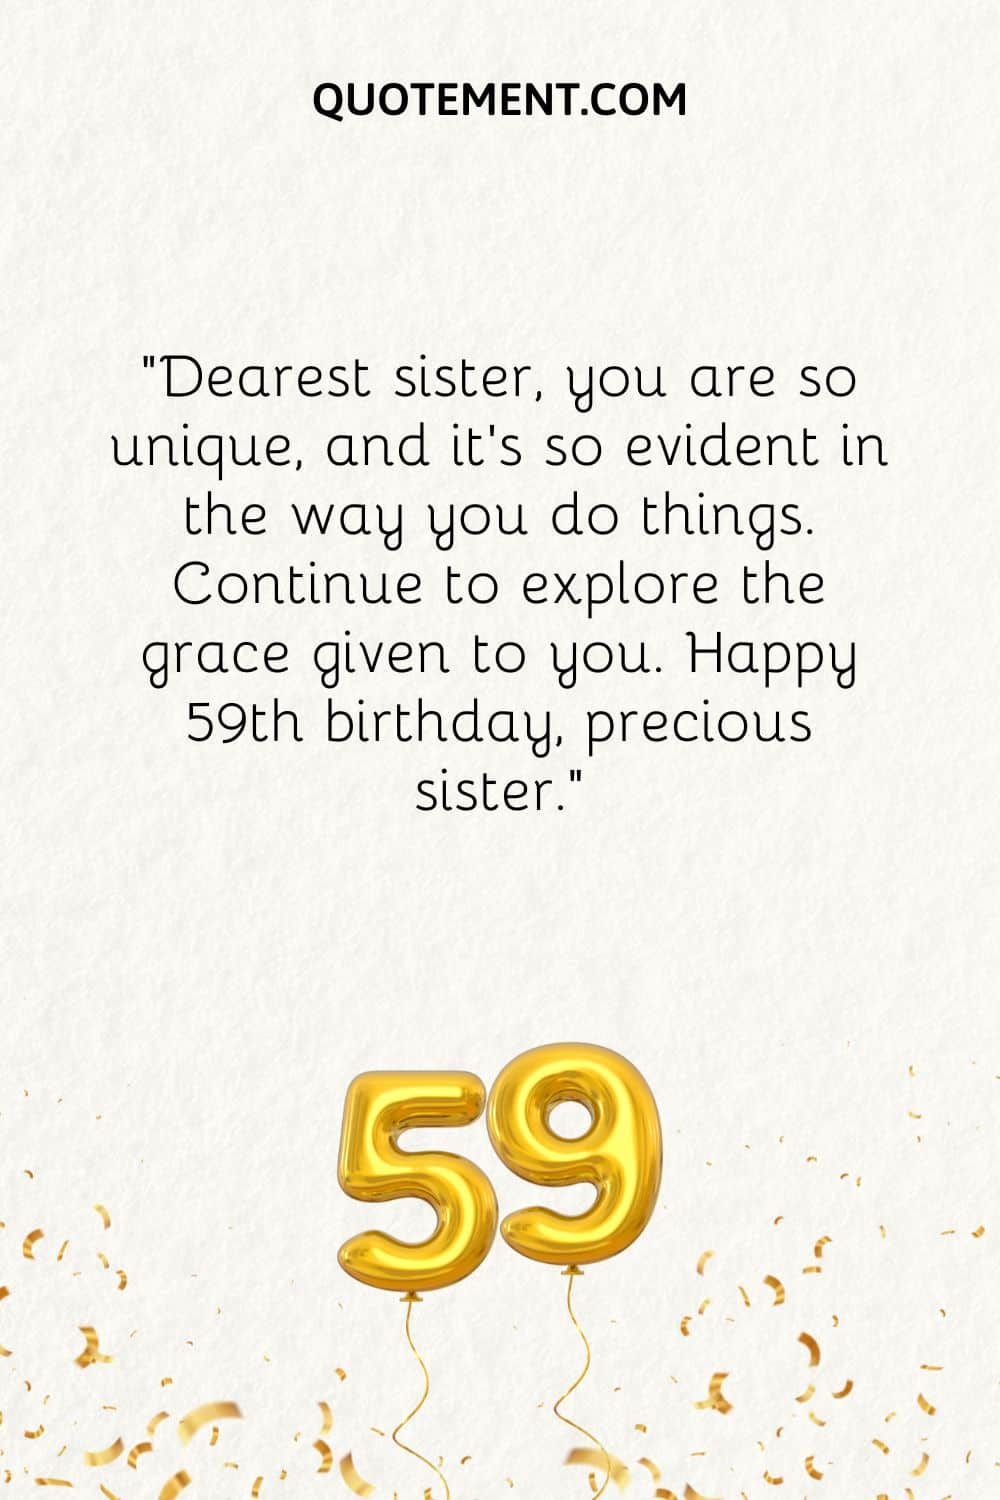 Dearest sister, you are so unique, and it’s so evident in the way you do things